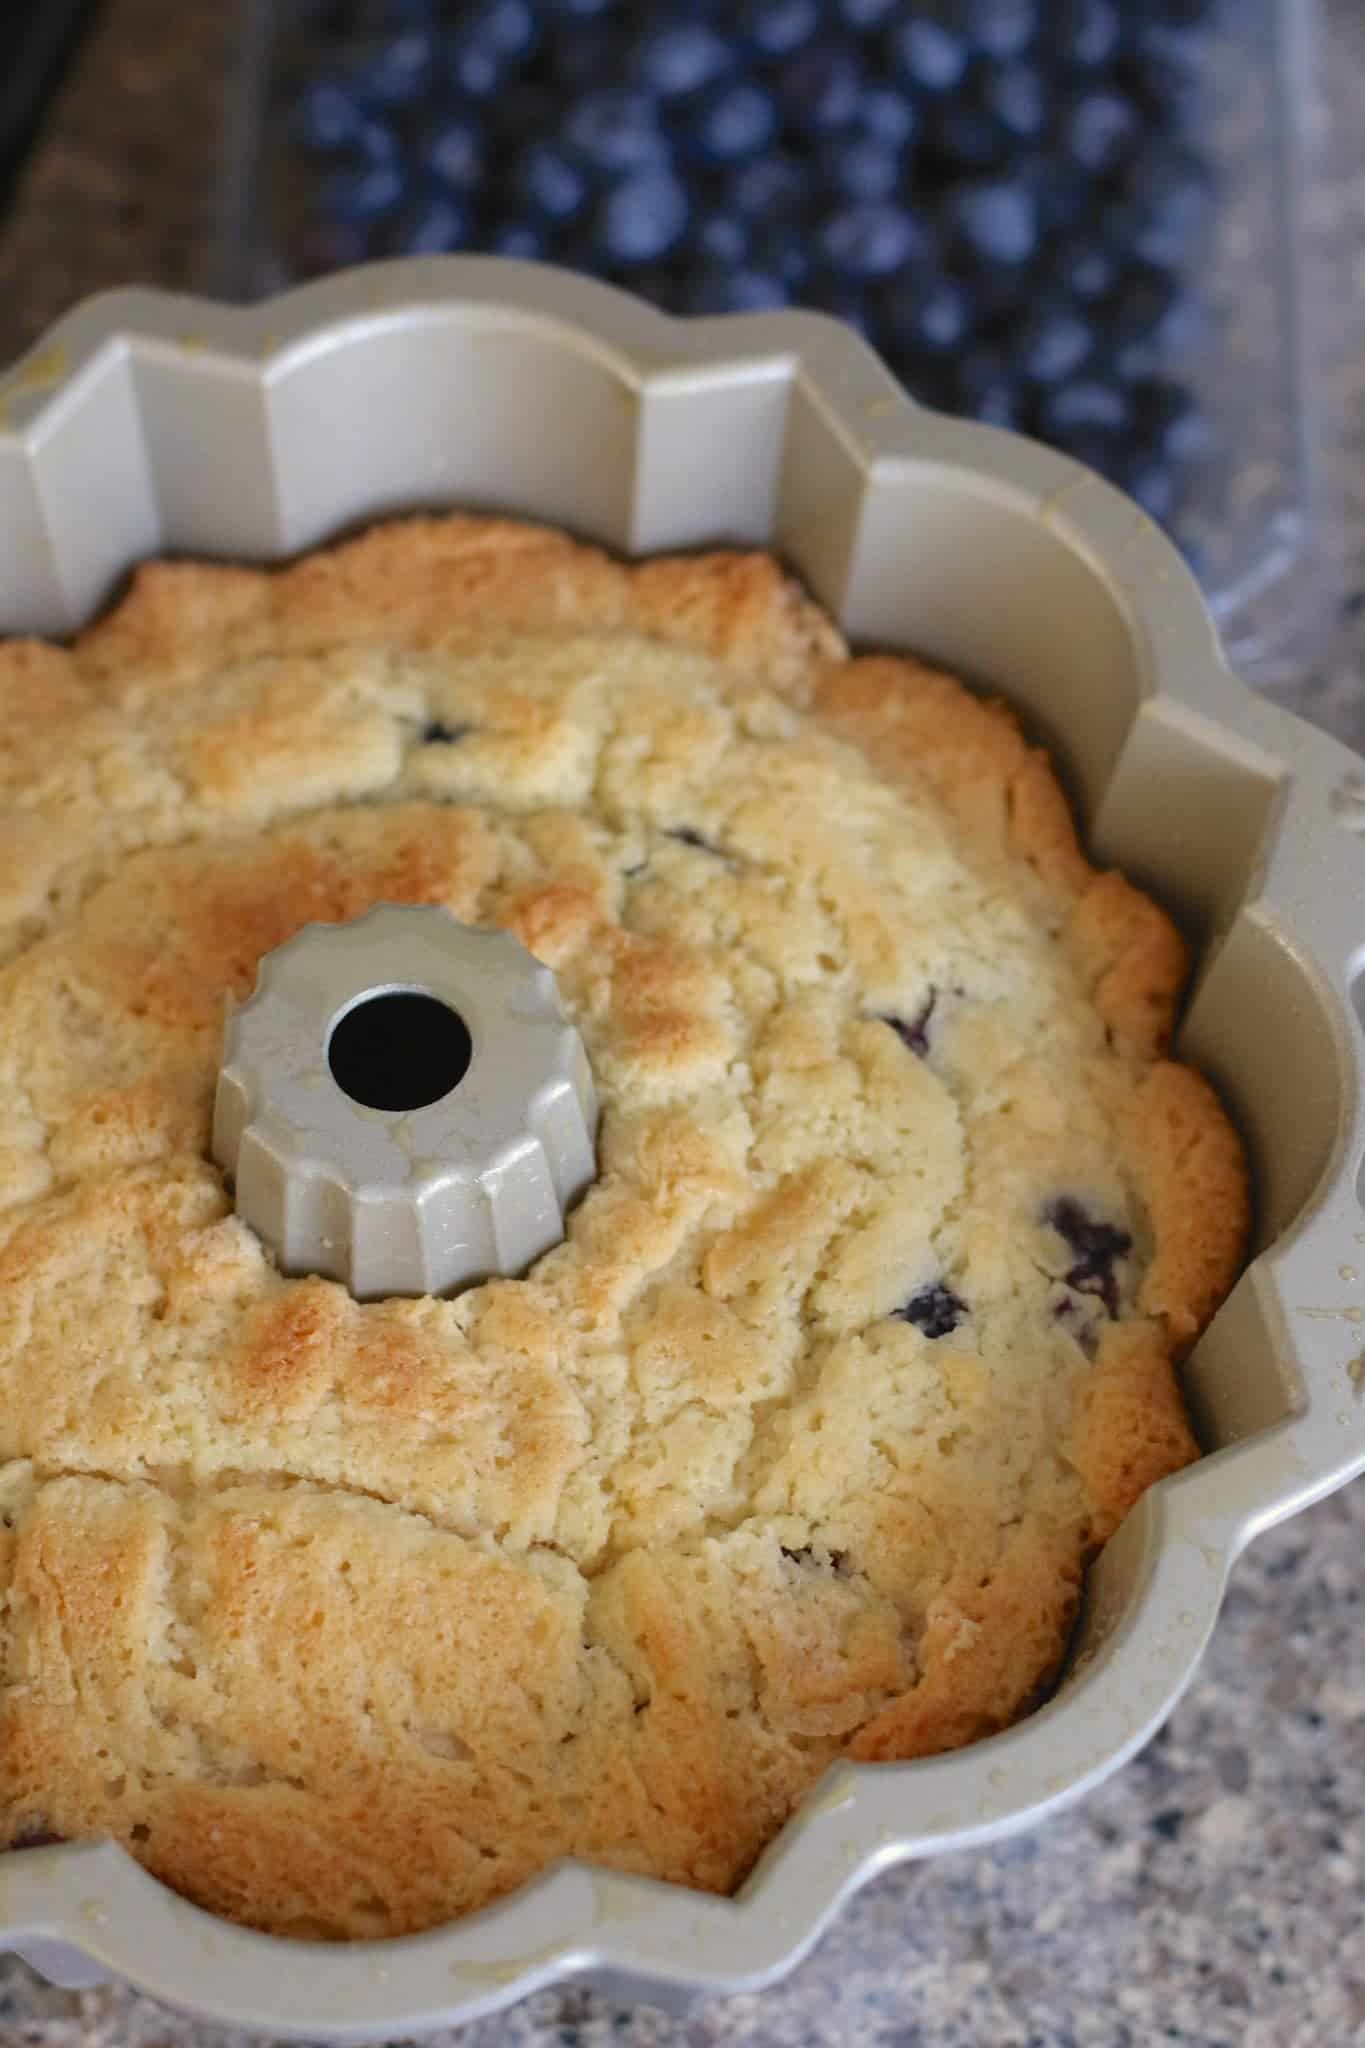 fully baked blueberry muffin cake.